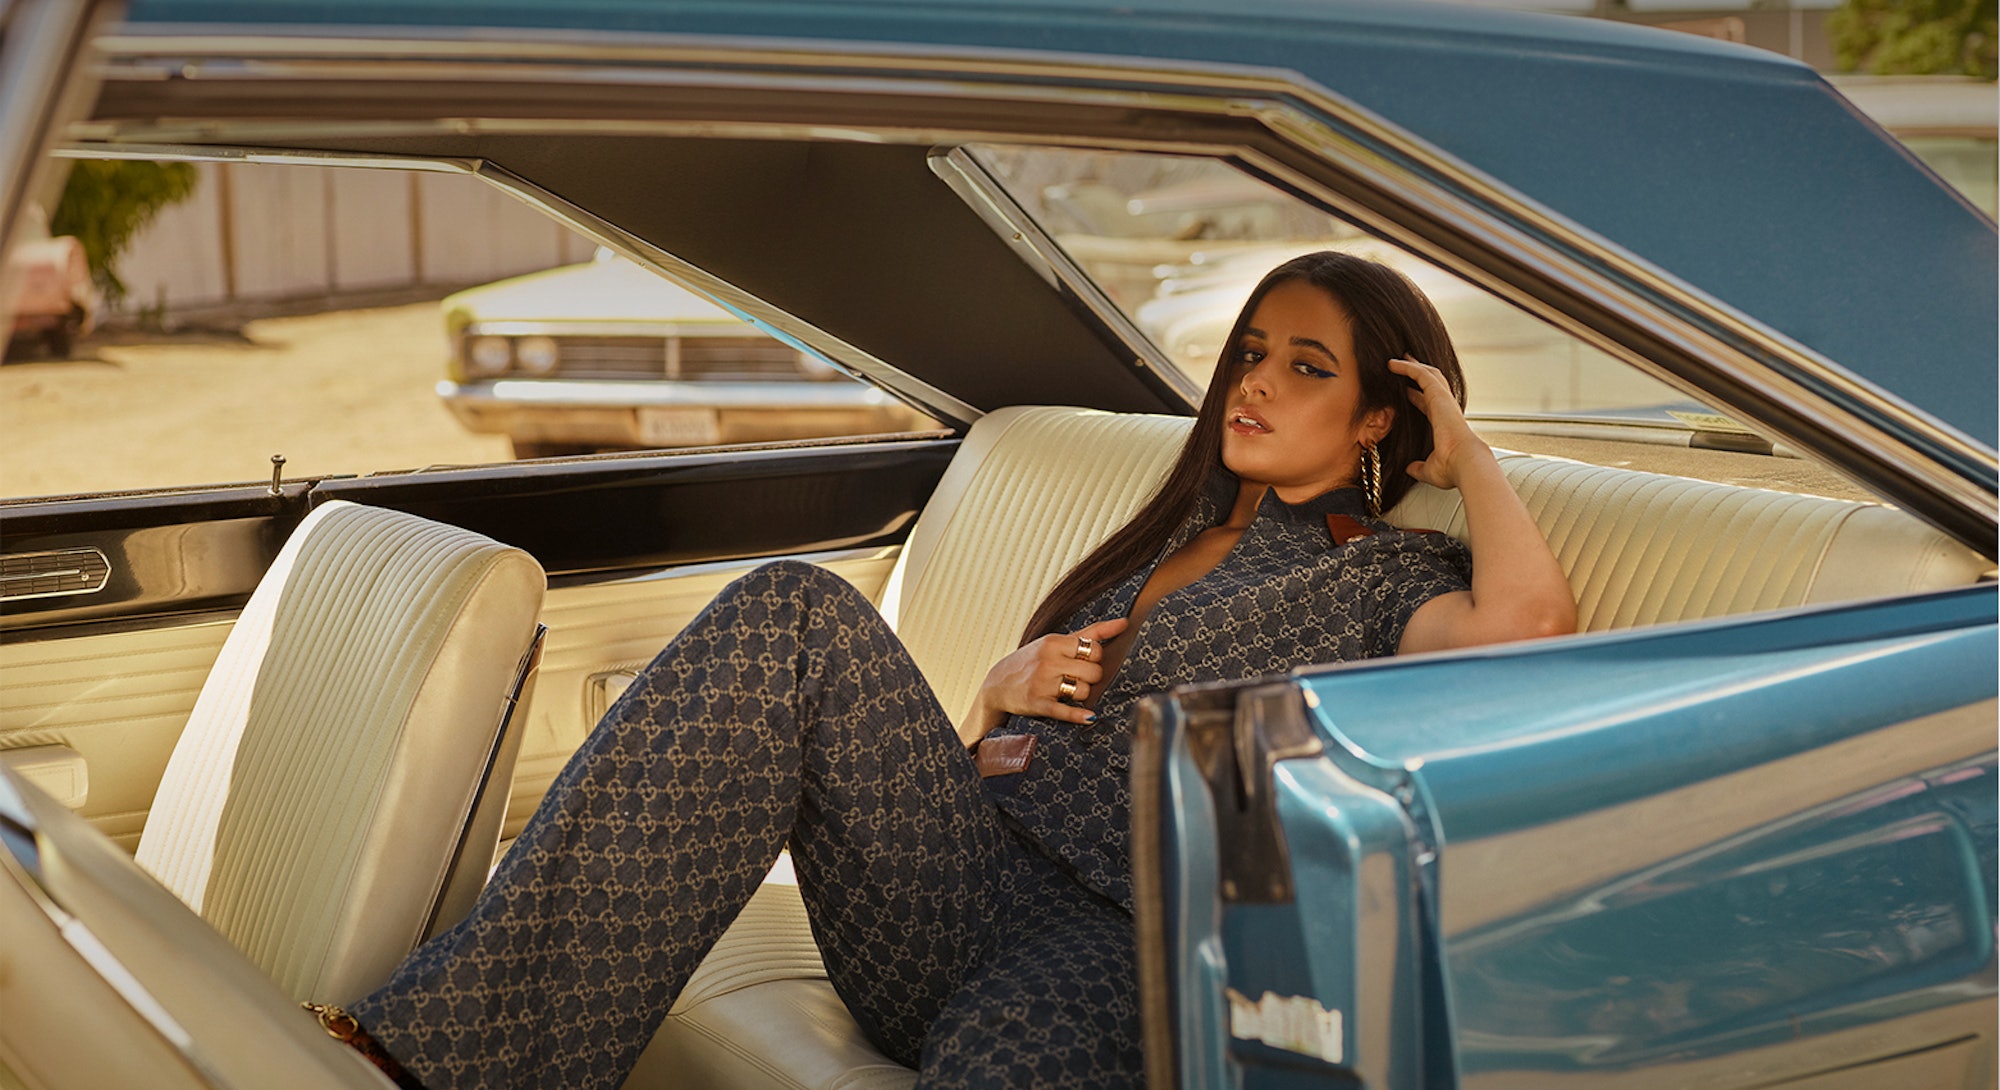 Camila Cabello wears denim Gucci while posing in a car for the cover of Bustle's denim issue.